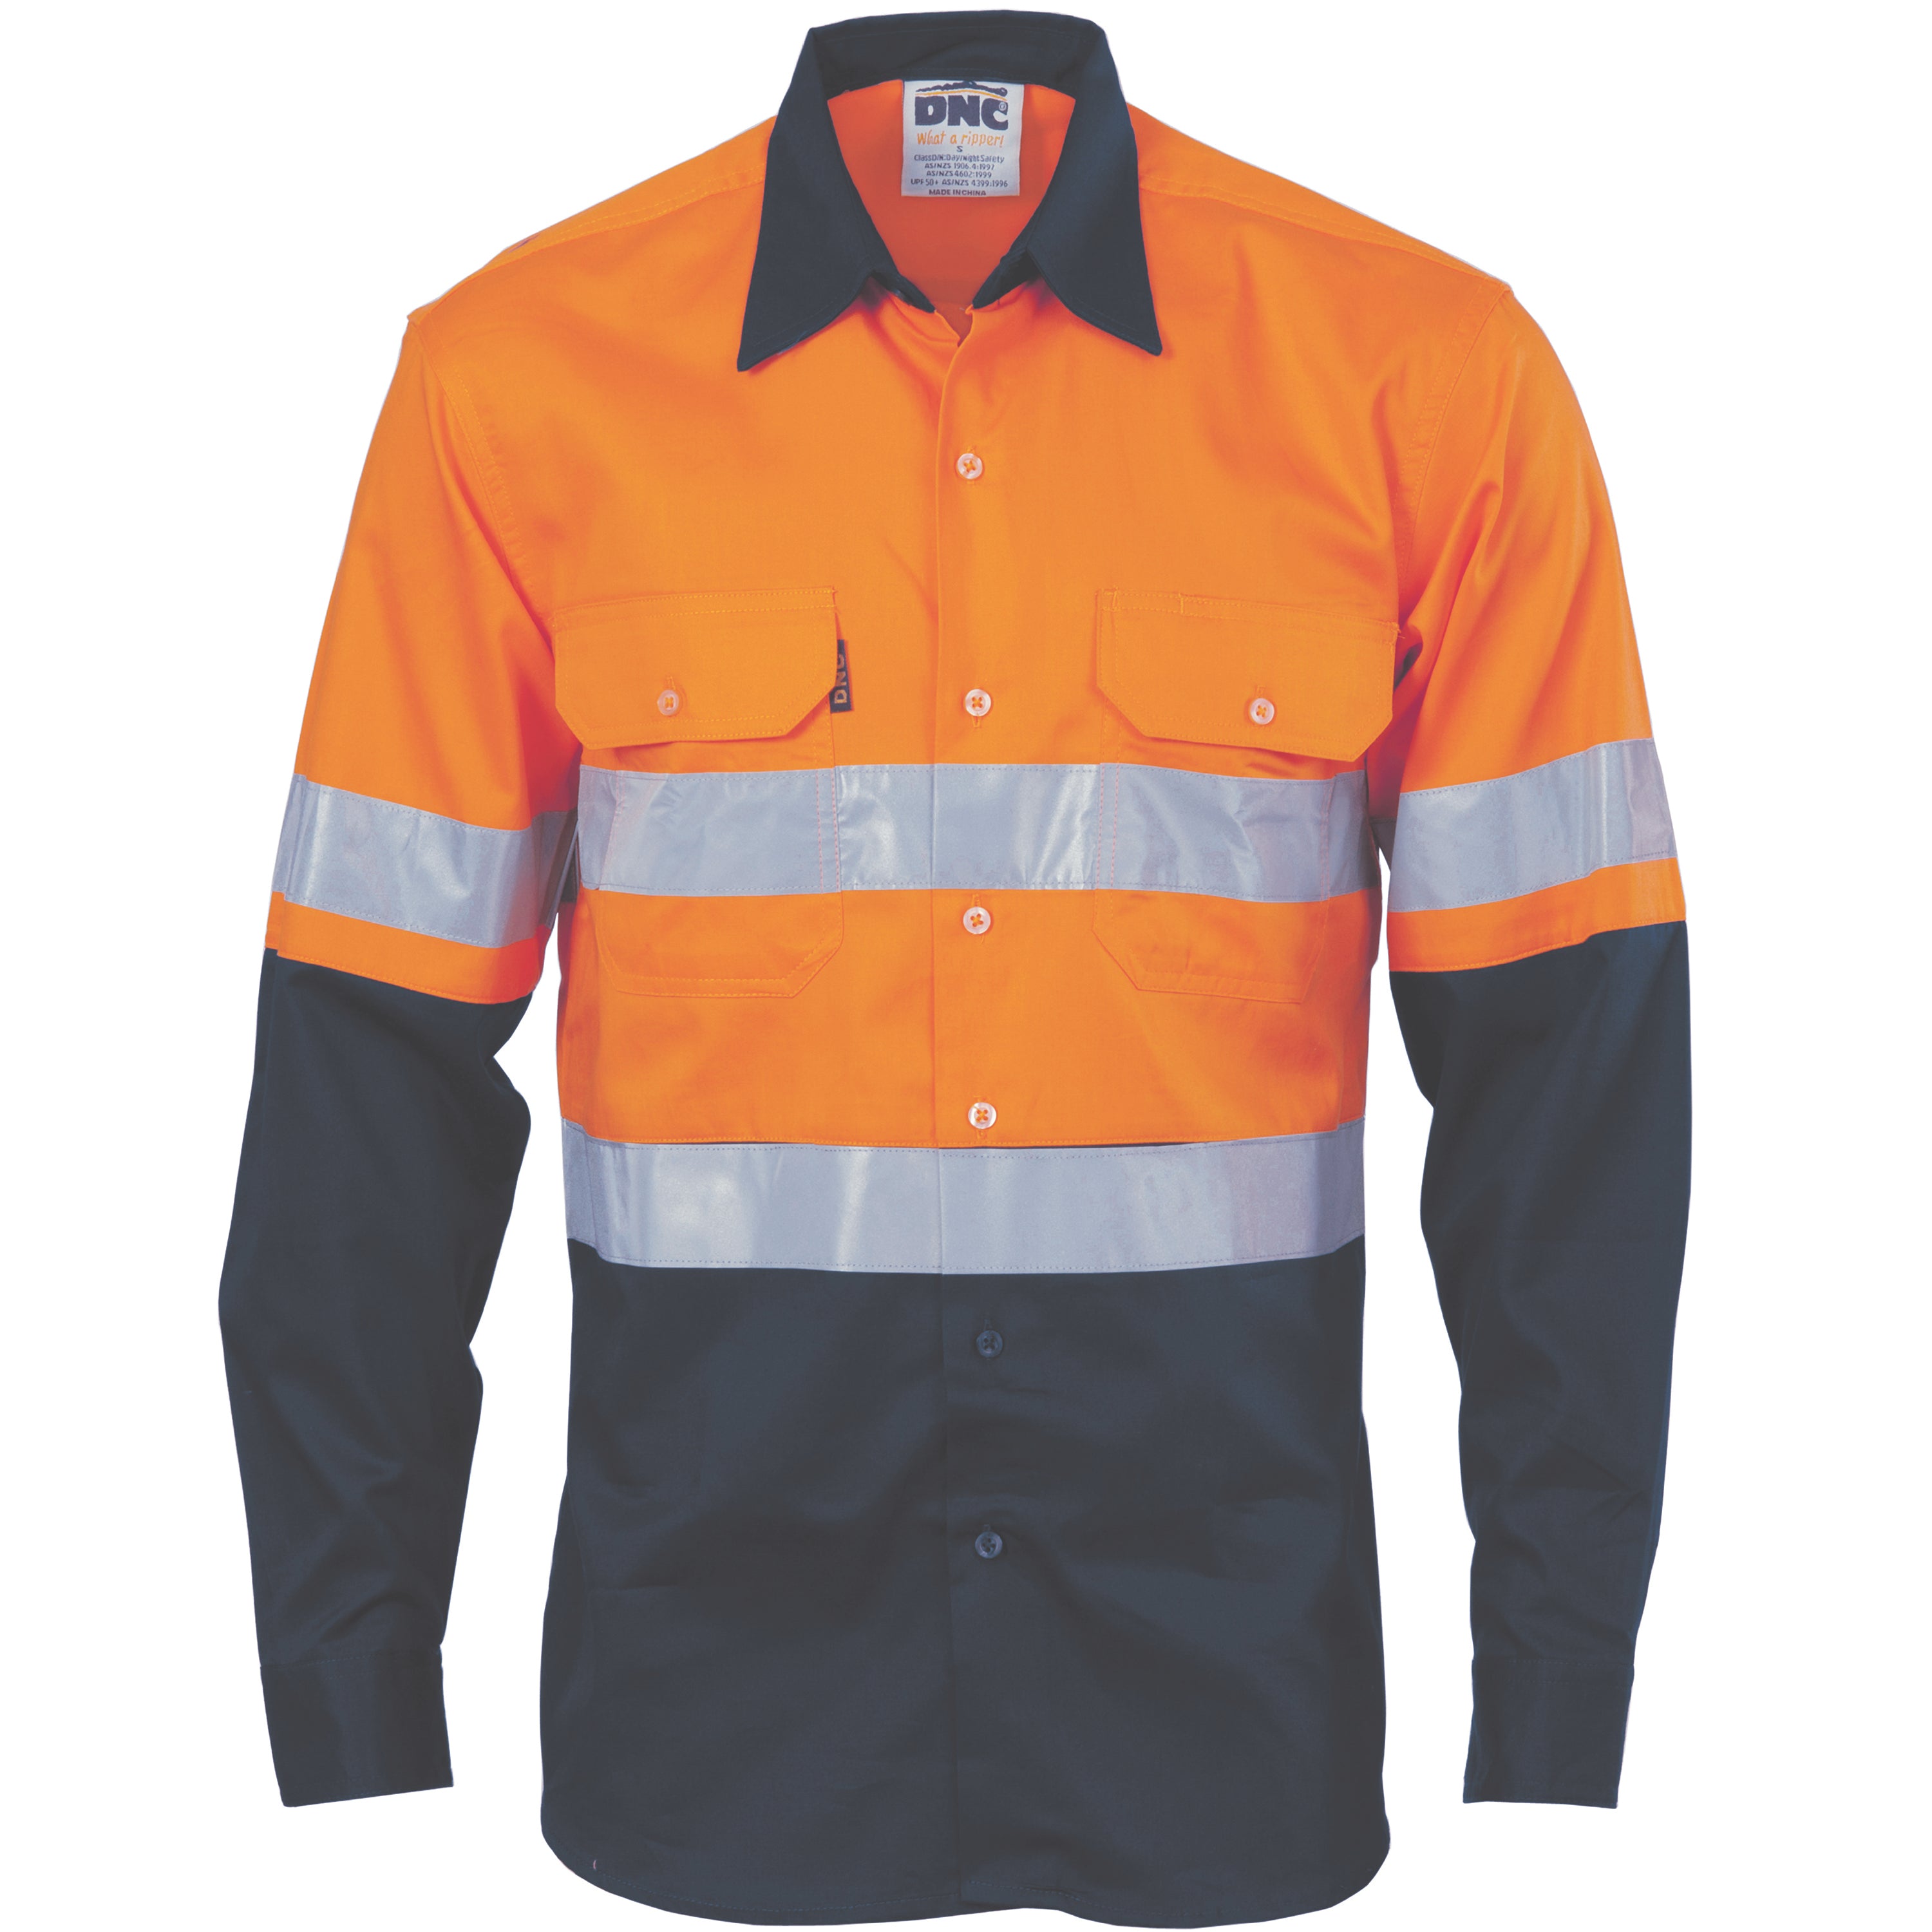 DNC - 3984 - Hi Vis Cool-Breeze Vertical Vented Cotton Shirt with Generic R/Tape - Long sleeve